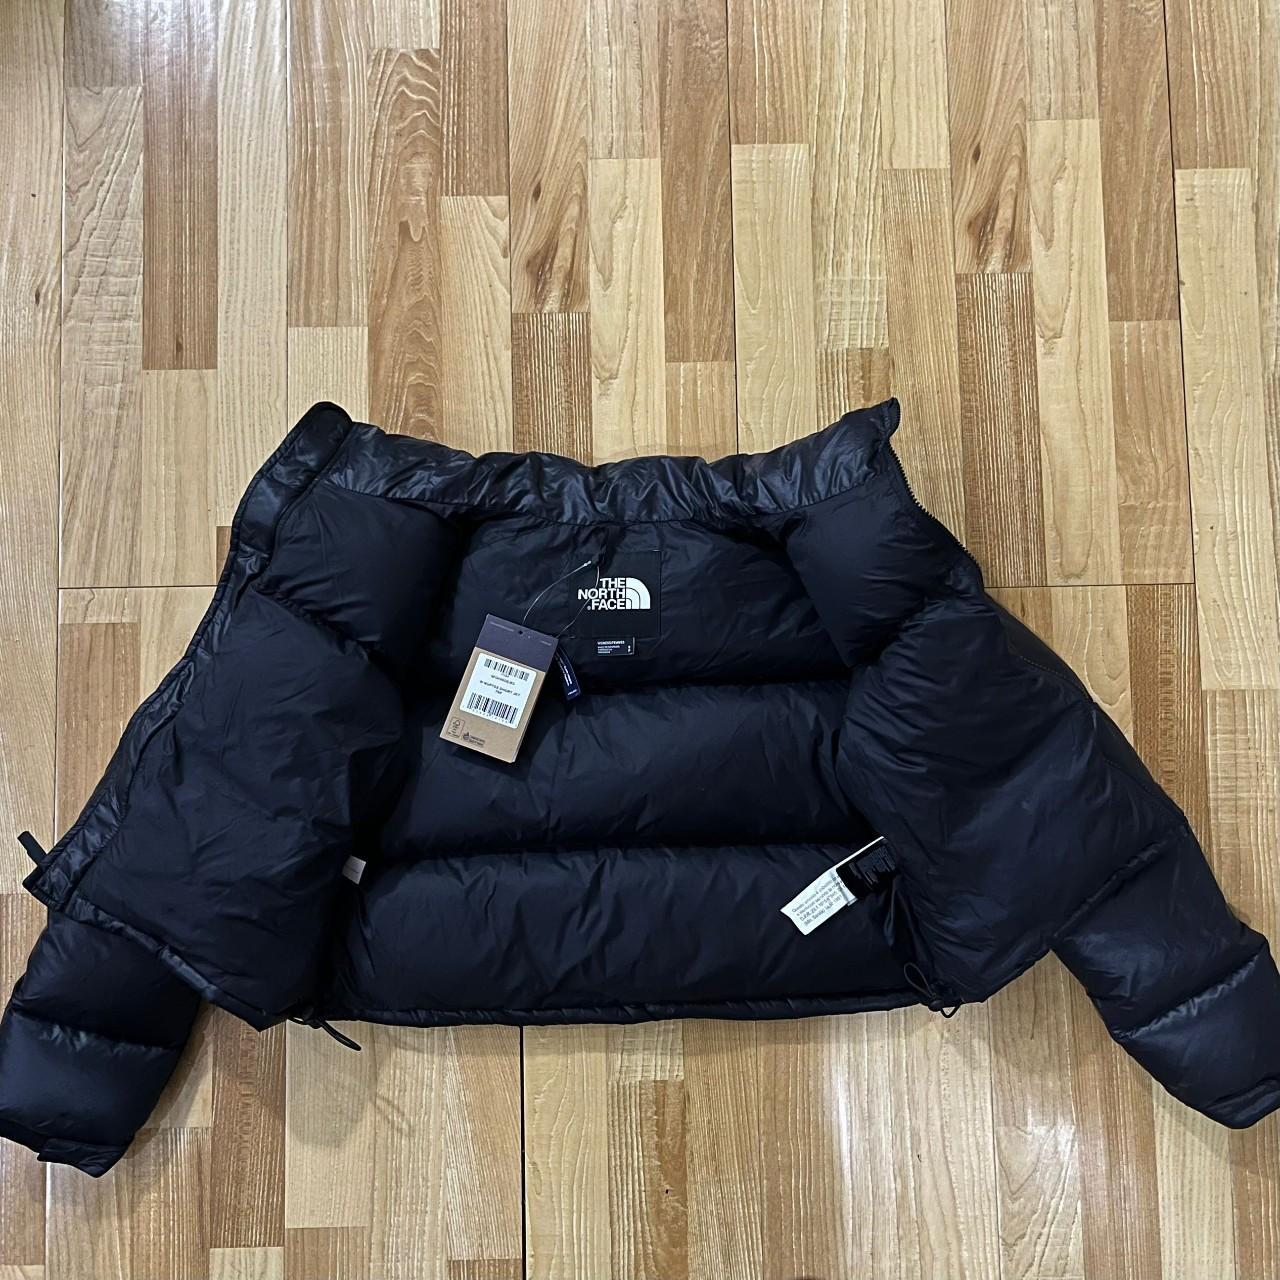 The North Face Puffer Winter Jacket 1996 Retro... - Depop